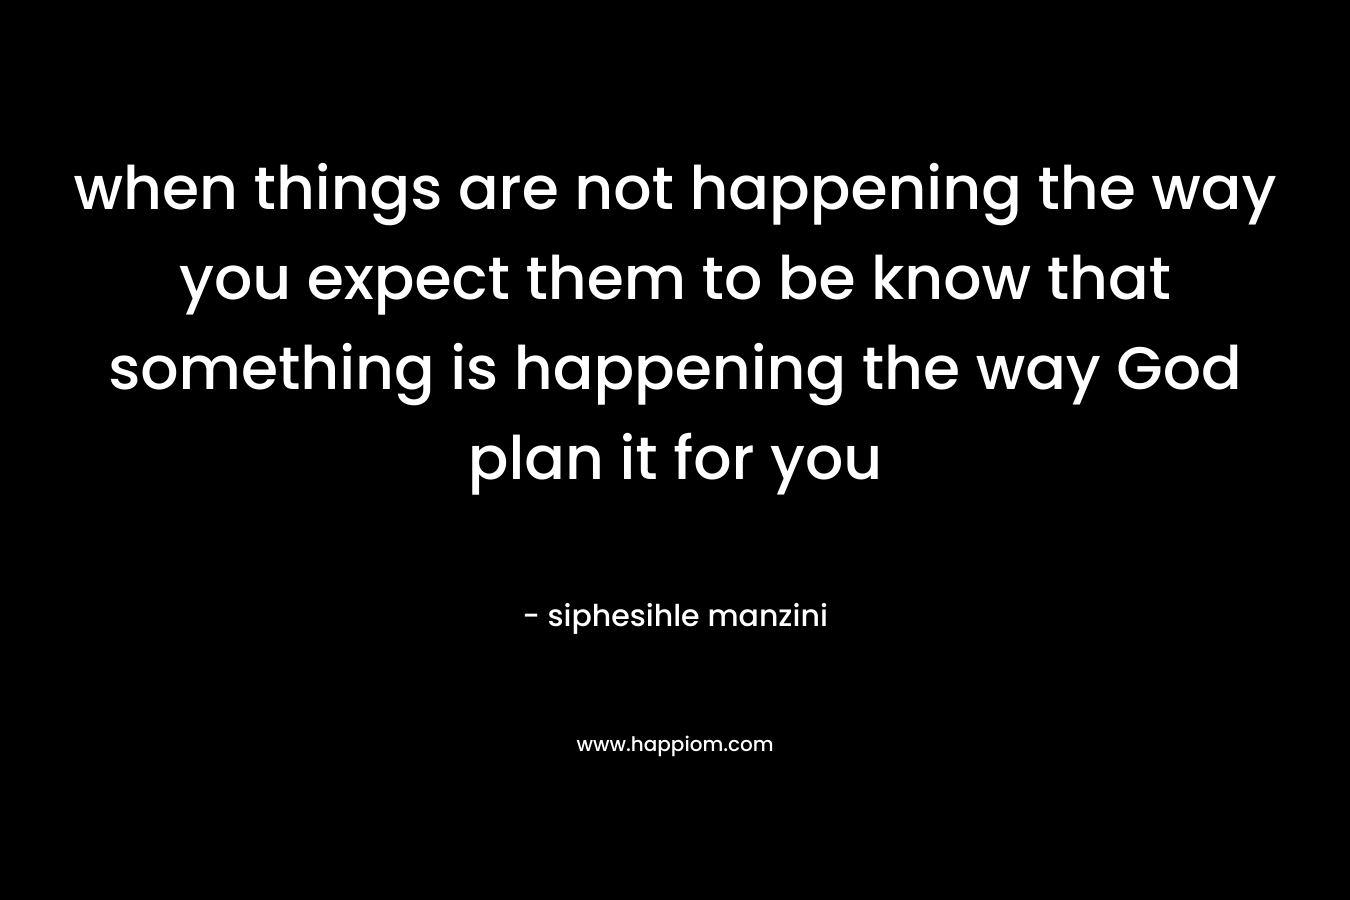 when things are not happening the way you expect them to be know that something is happening the way God plan it for you